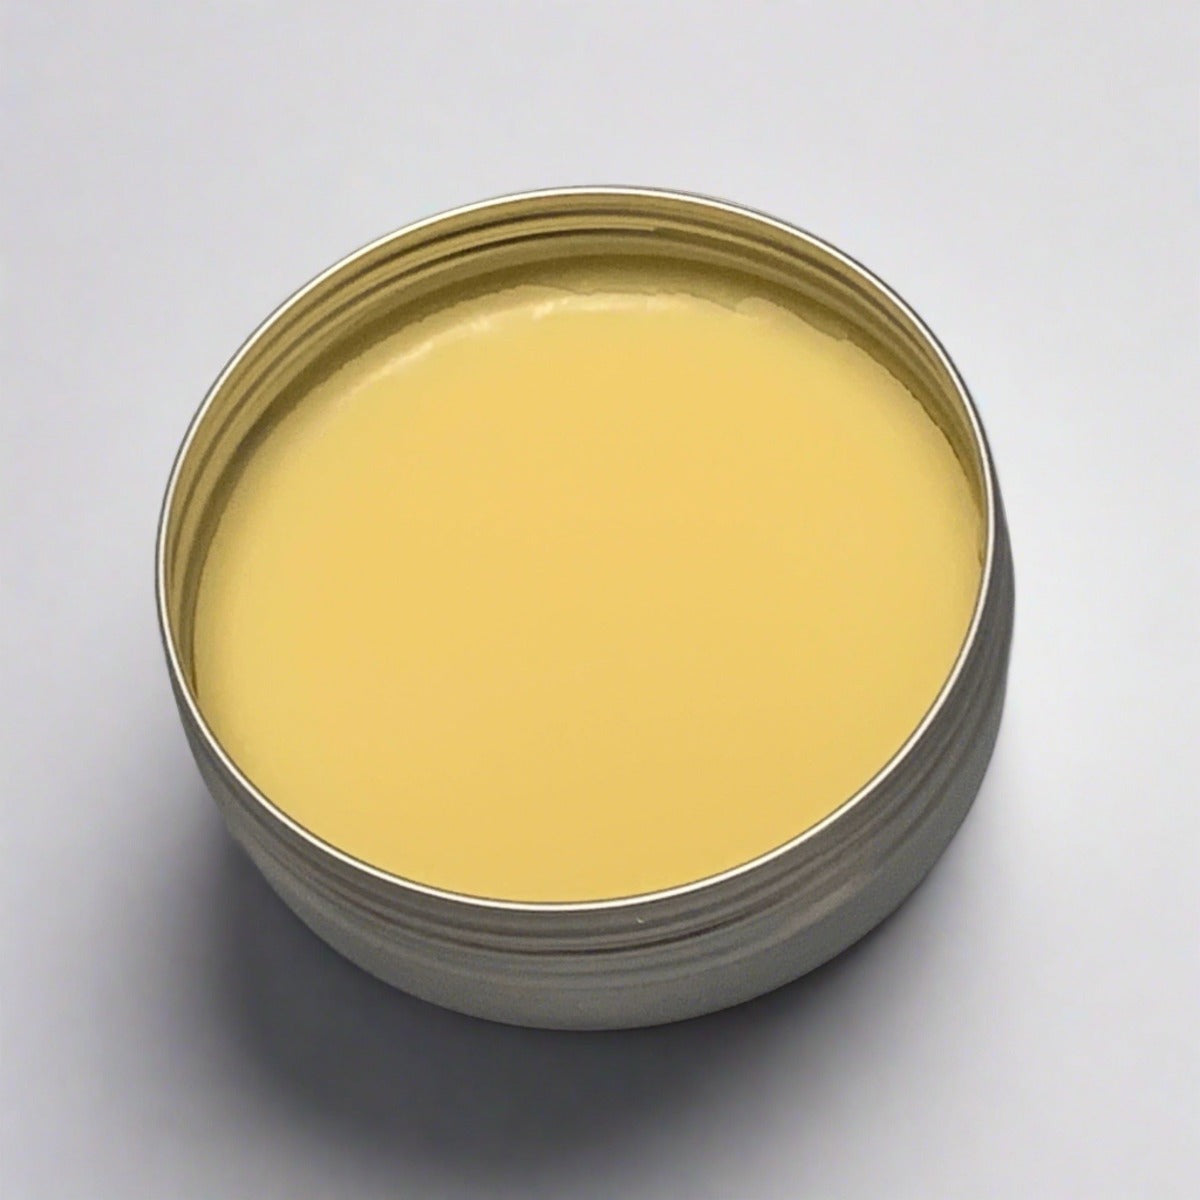 An image of a jar of Safe Harbor Hair Pomade, showcasing its sleek design and minimalist appearance. The pomade, enriched with pure botanicals, promises healthier and more vibrant hair. With options for various scents or an unscented choice, it offers a personalized experience for users seeking a premium hair care solution.